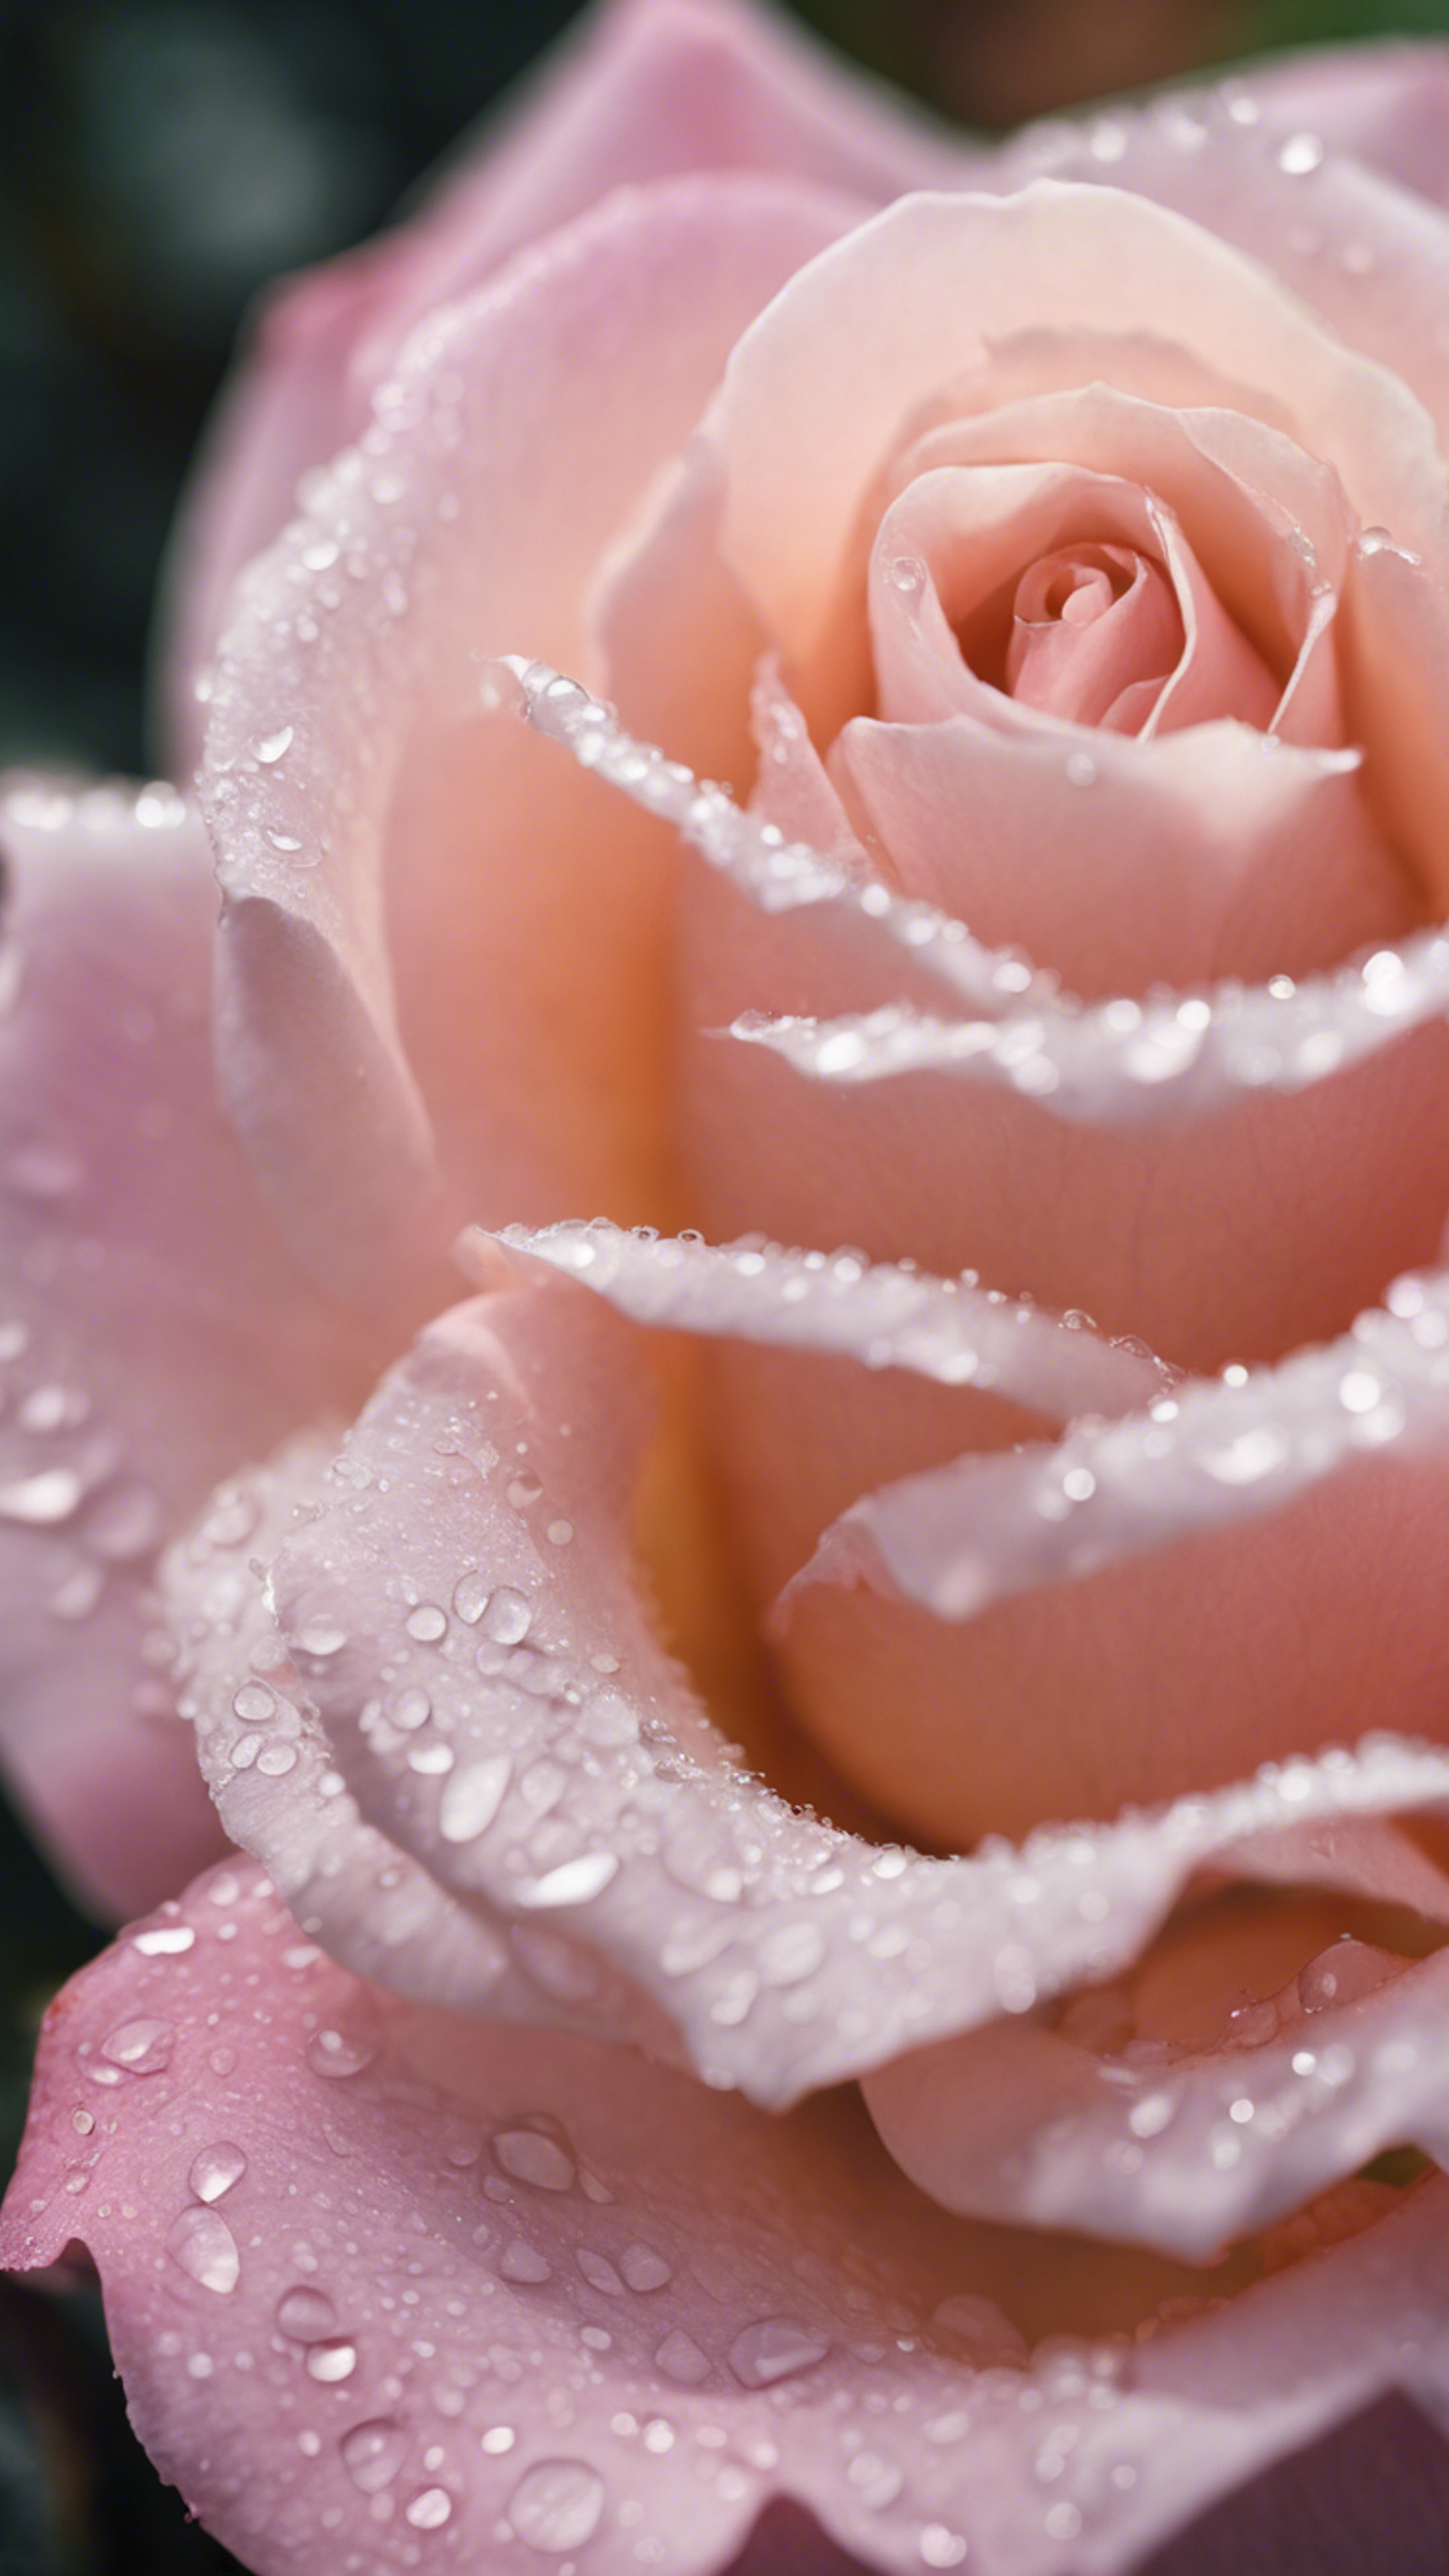 A close-up of a single, pristine light pink rose with morning dew on its petals. Wallpaper[bd4ab94af7c44aa5b58d]